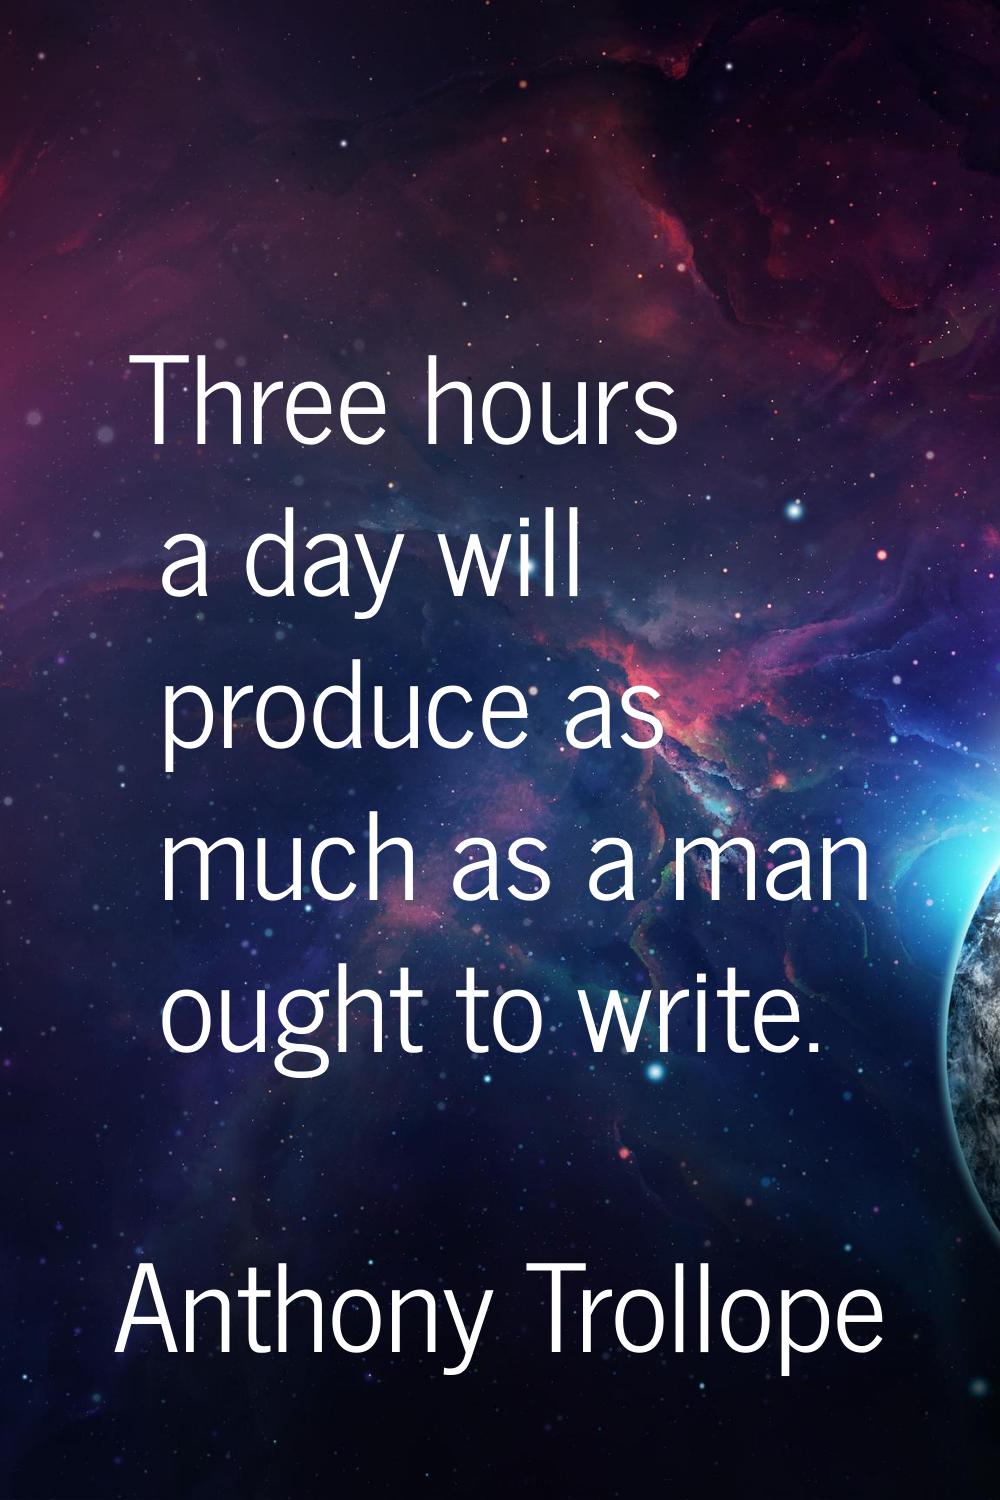 Three hours a day will produce as much as a man ought to write.